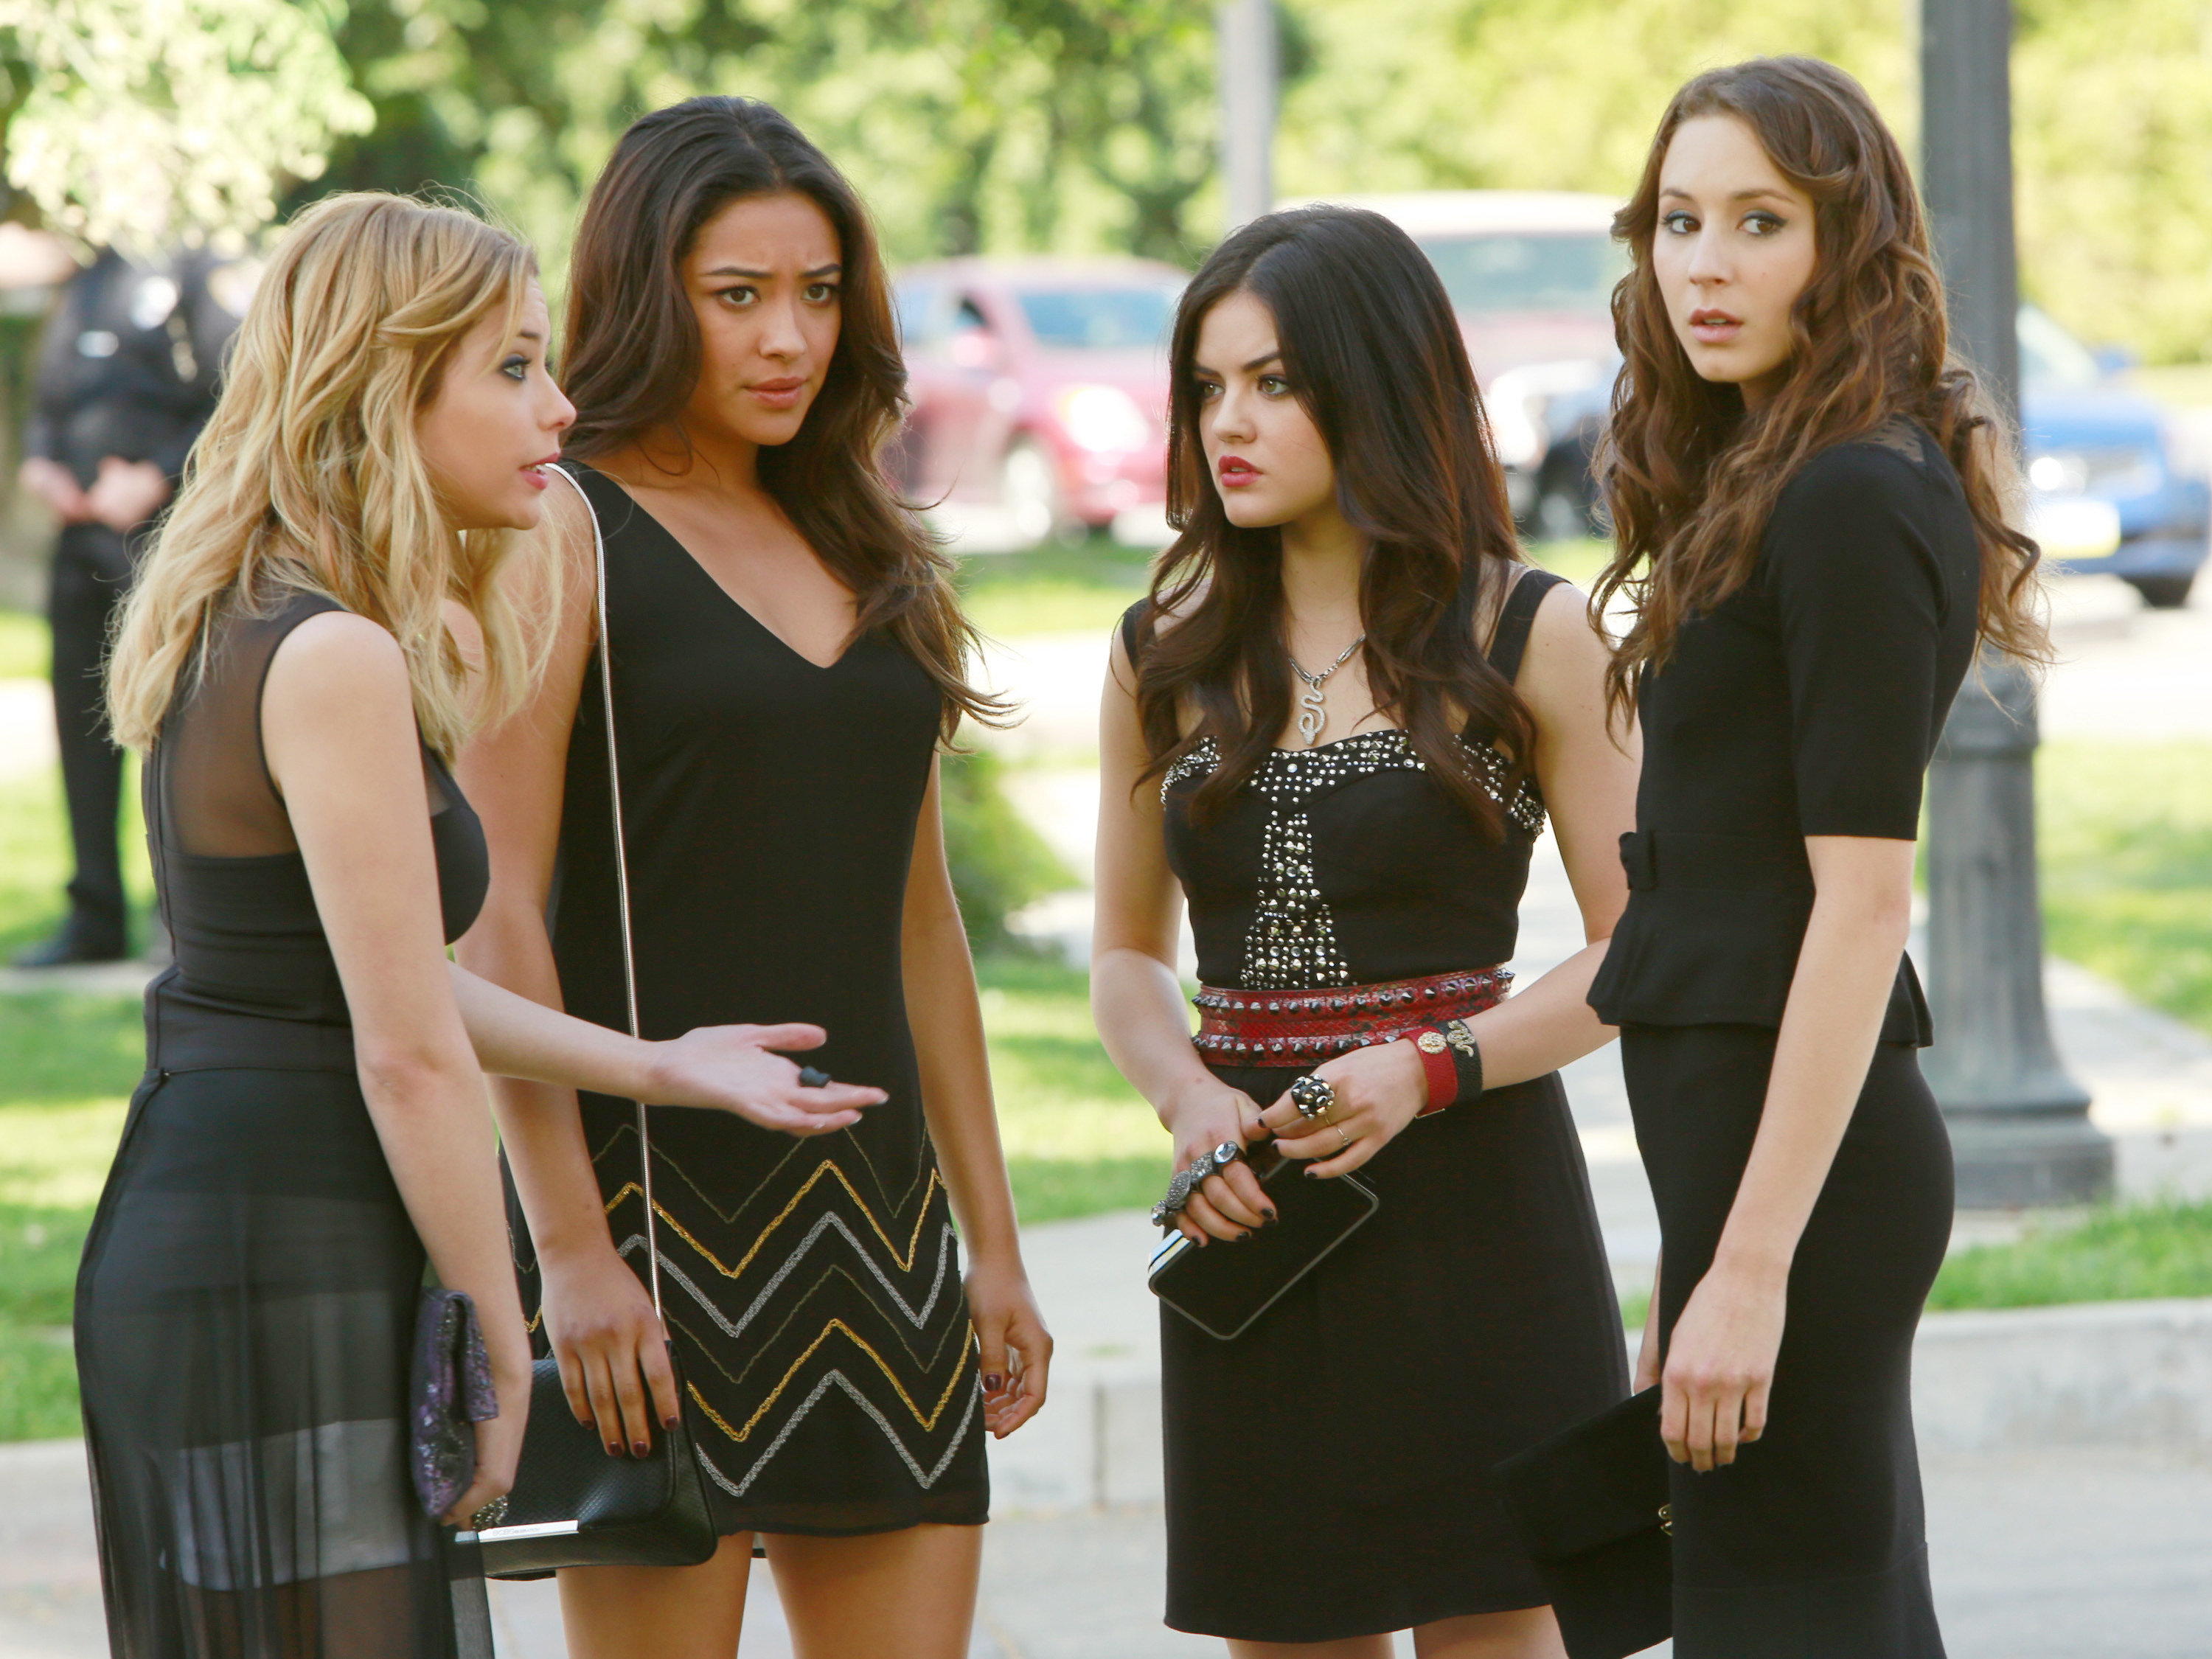 the Liars at Alison&#x27;s funeral in pilot